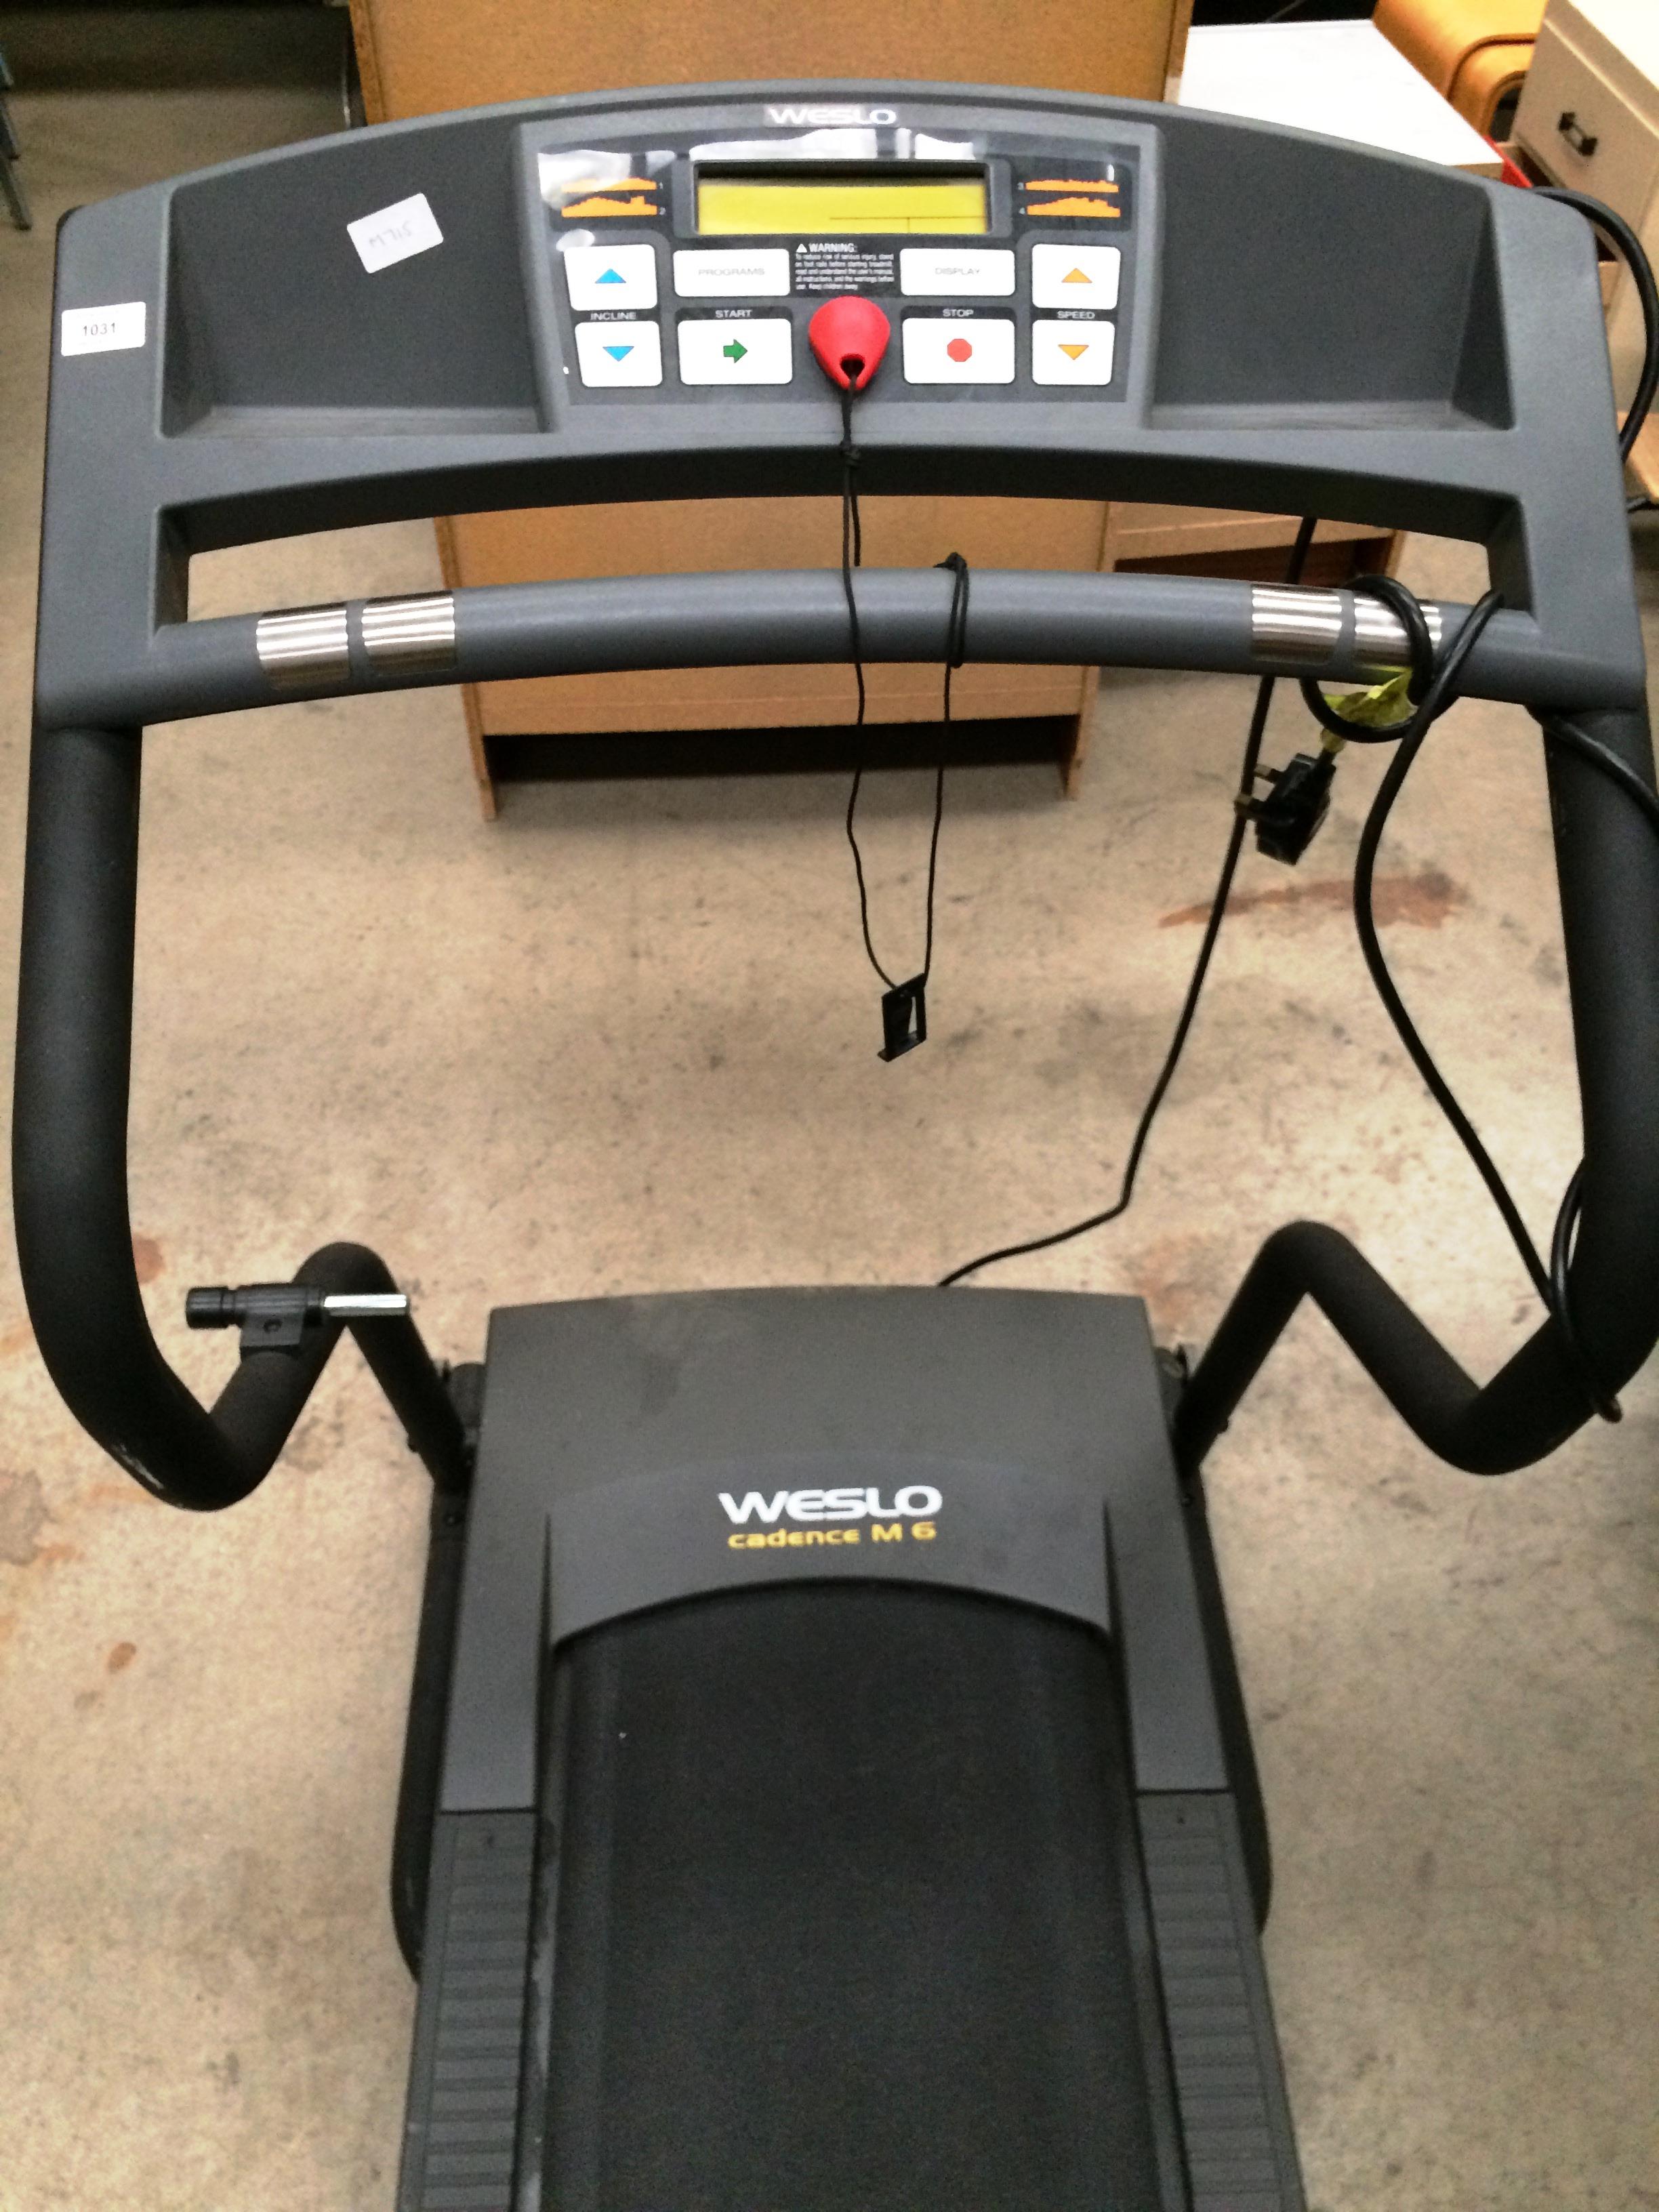 A Welso Cadence M6 running exercise machine with digital readout - 240v - Image 2 of 2